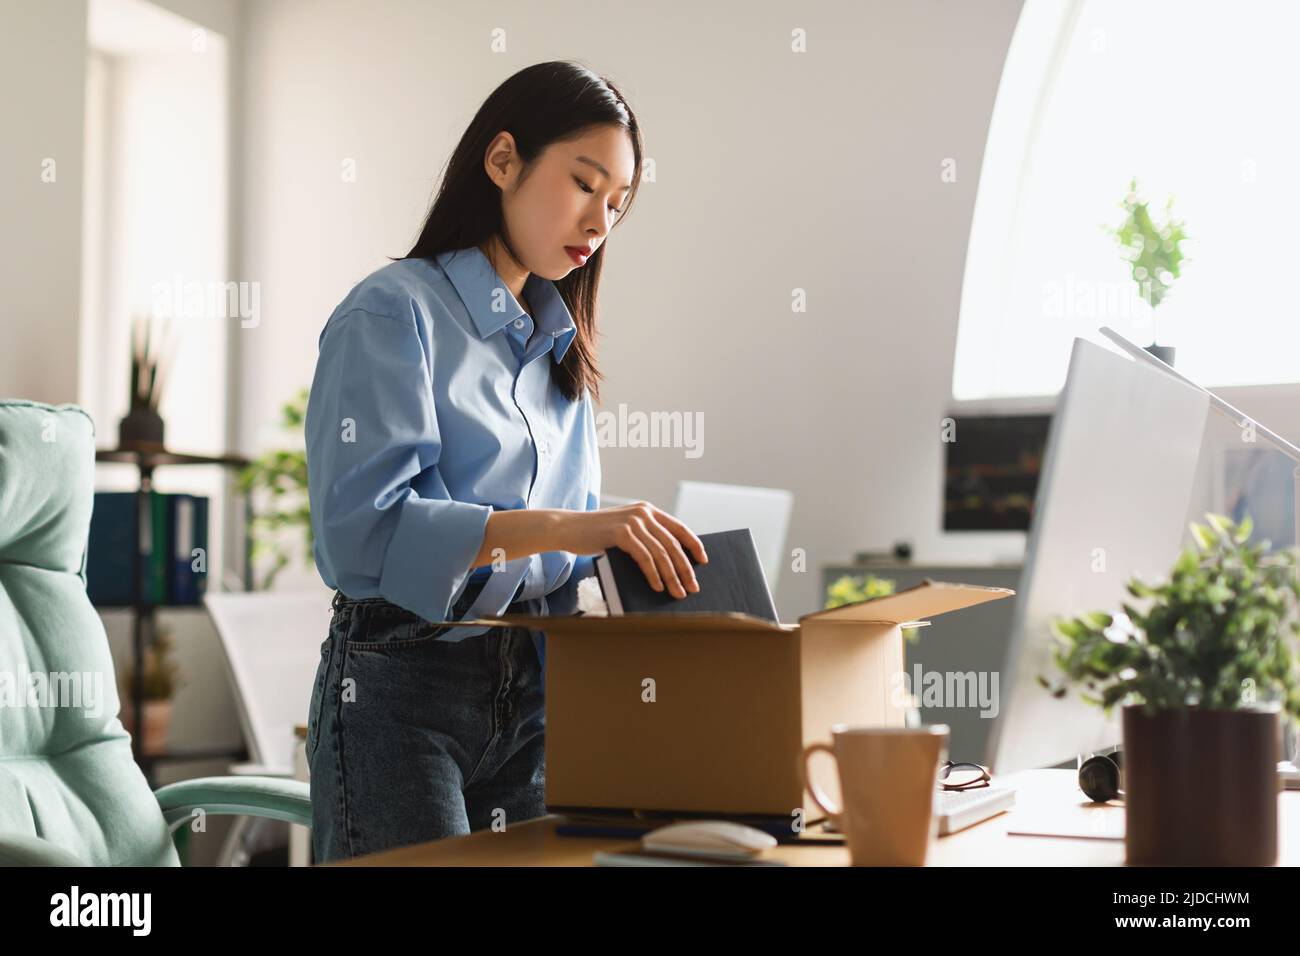 Fired Asian Woman Packing Belongings In Box After Dismissal Indoor Stock Photo